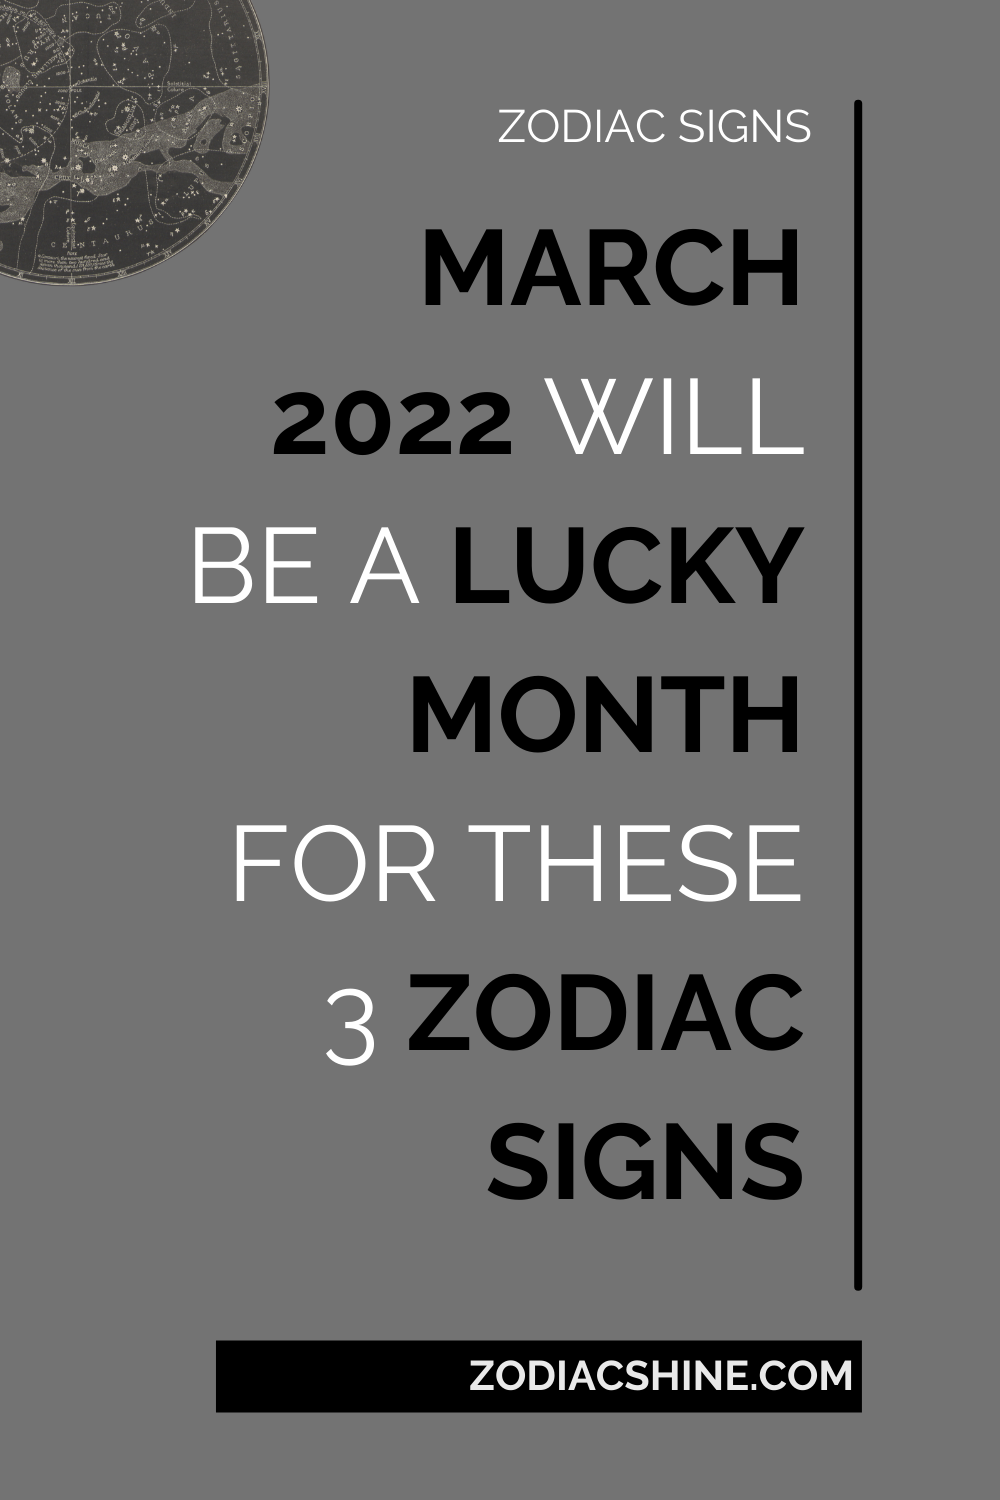 March 2022 Will Be A Lucky Month For These 3 Zodiac Signs